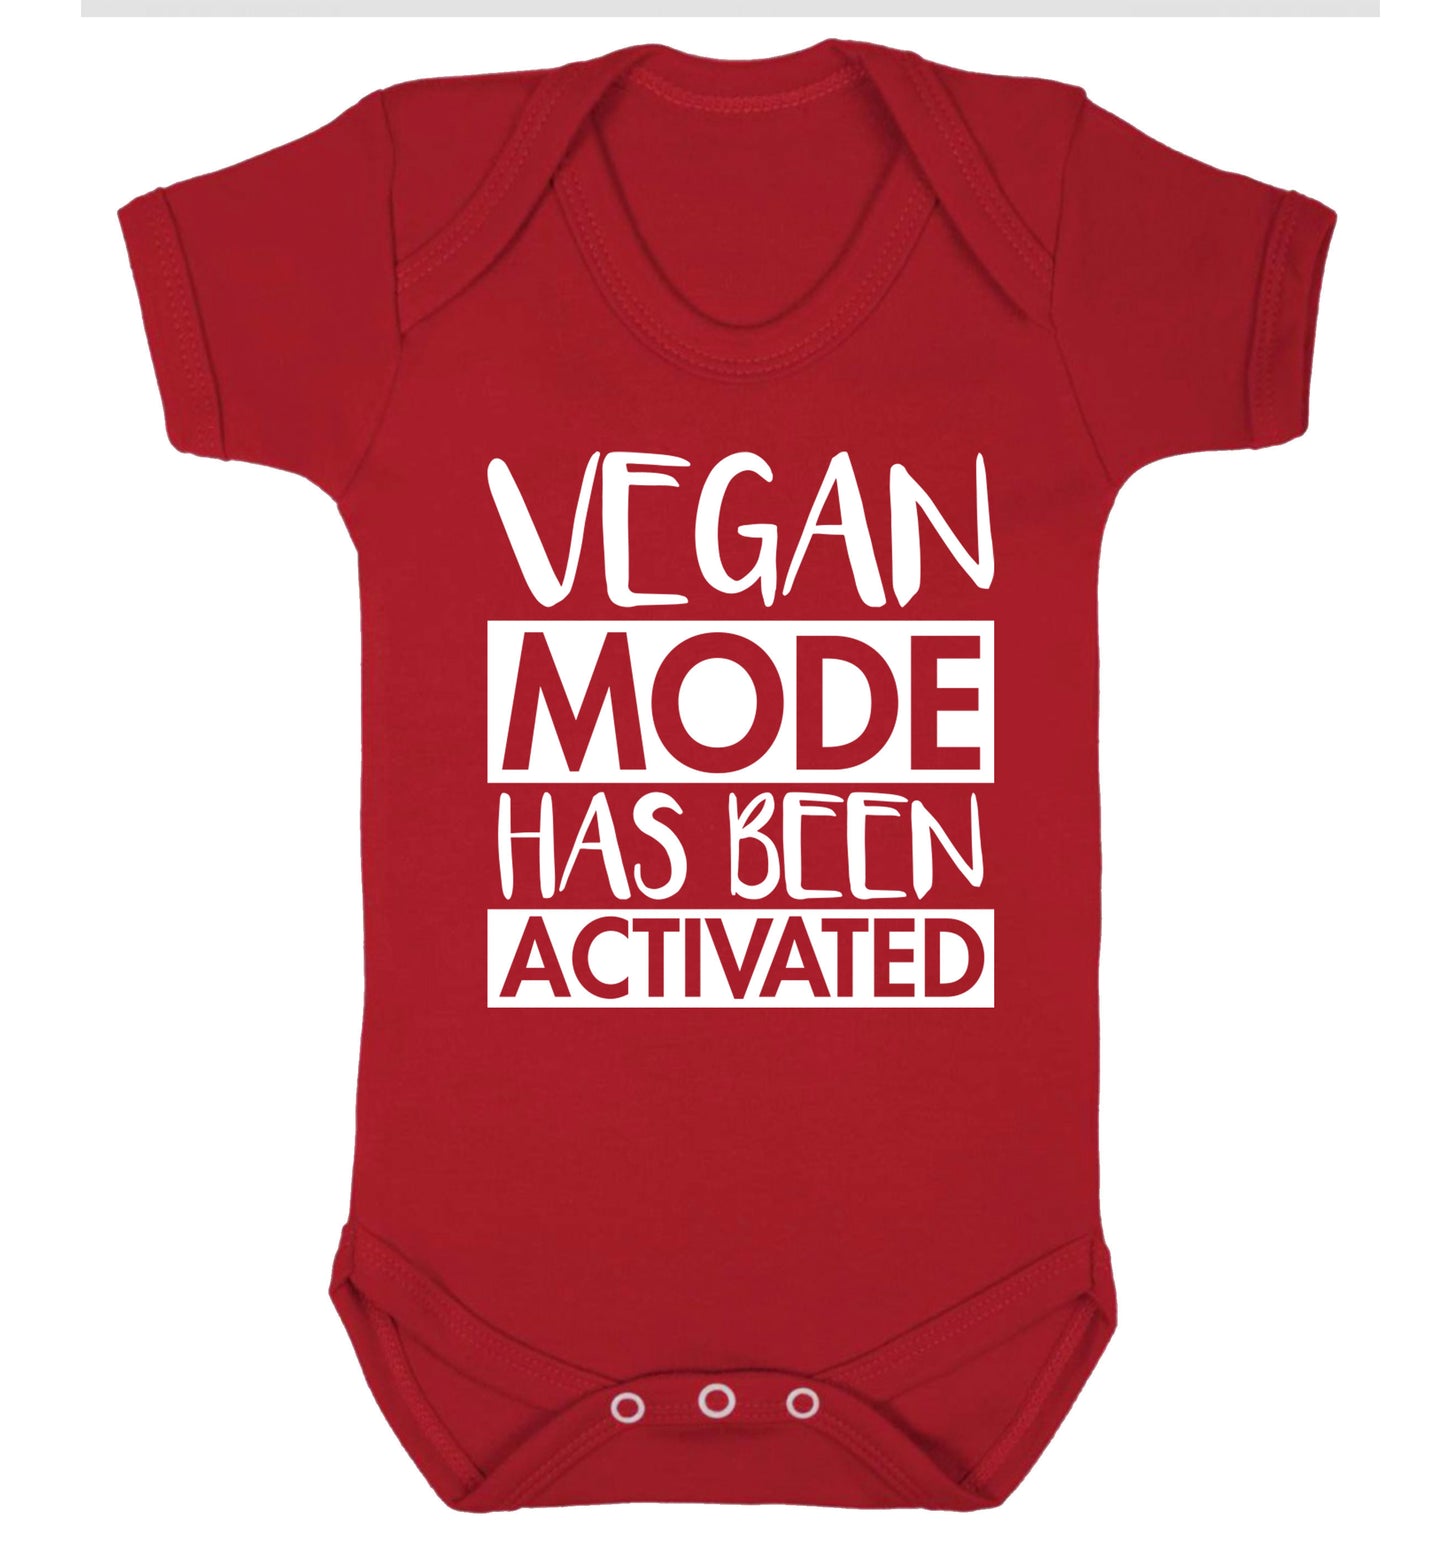 Vegan mode activated Baby Vest red 18-24 months